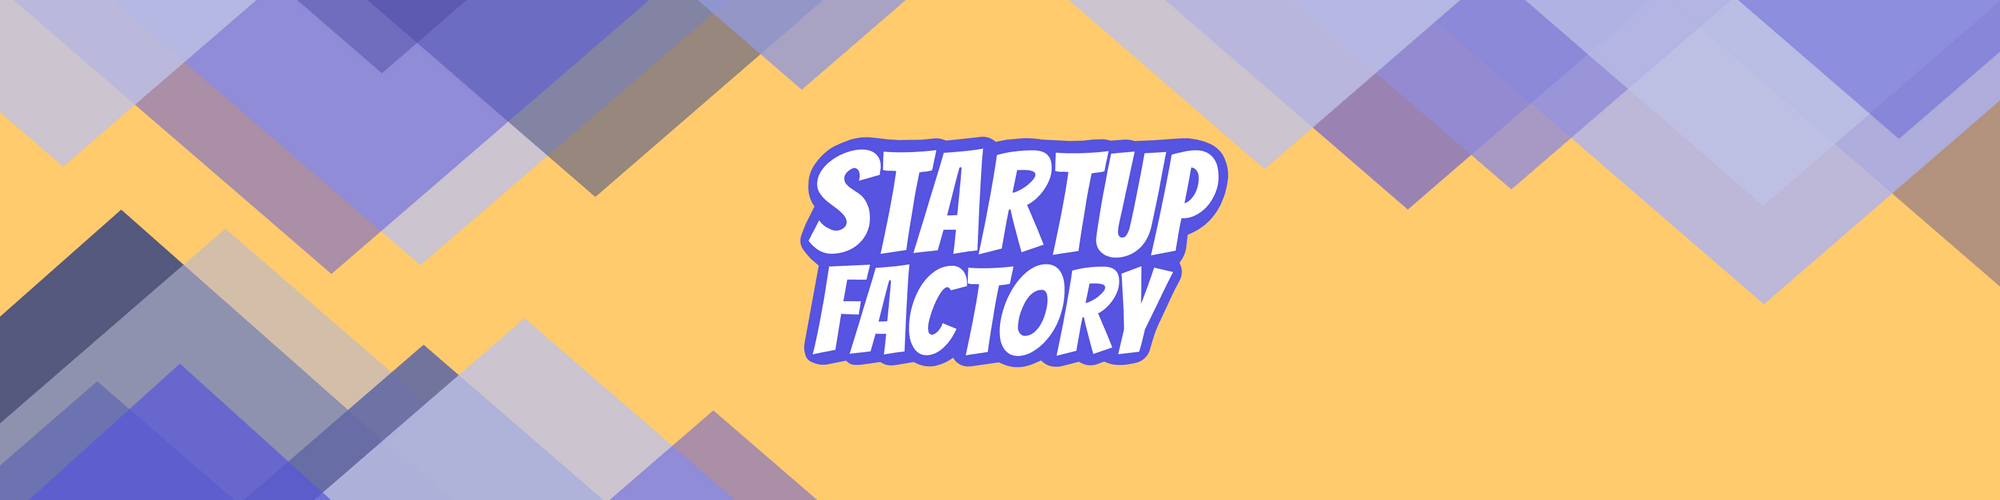 startup factory